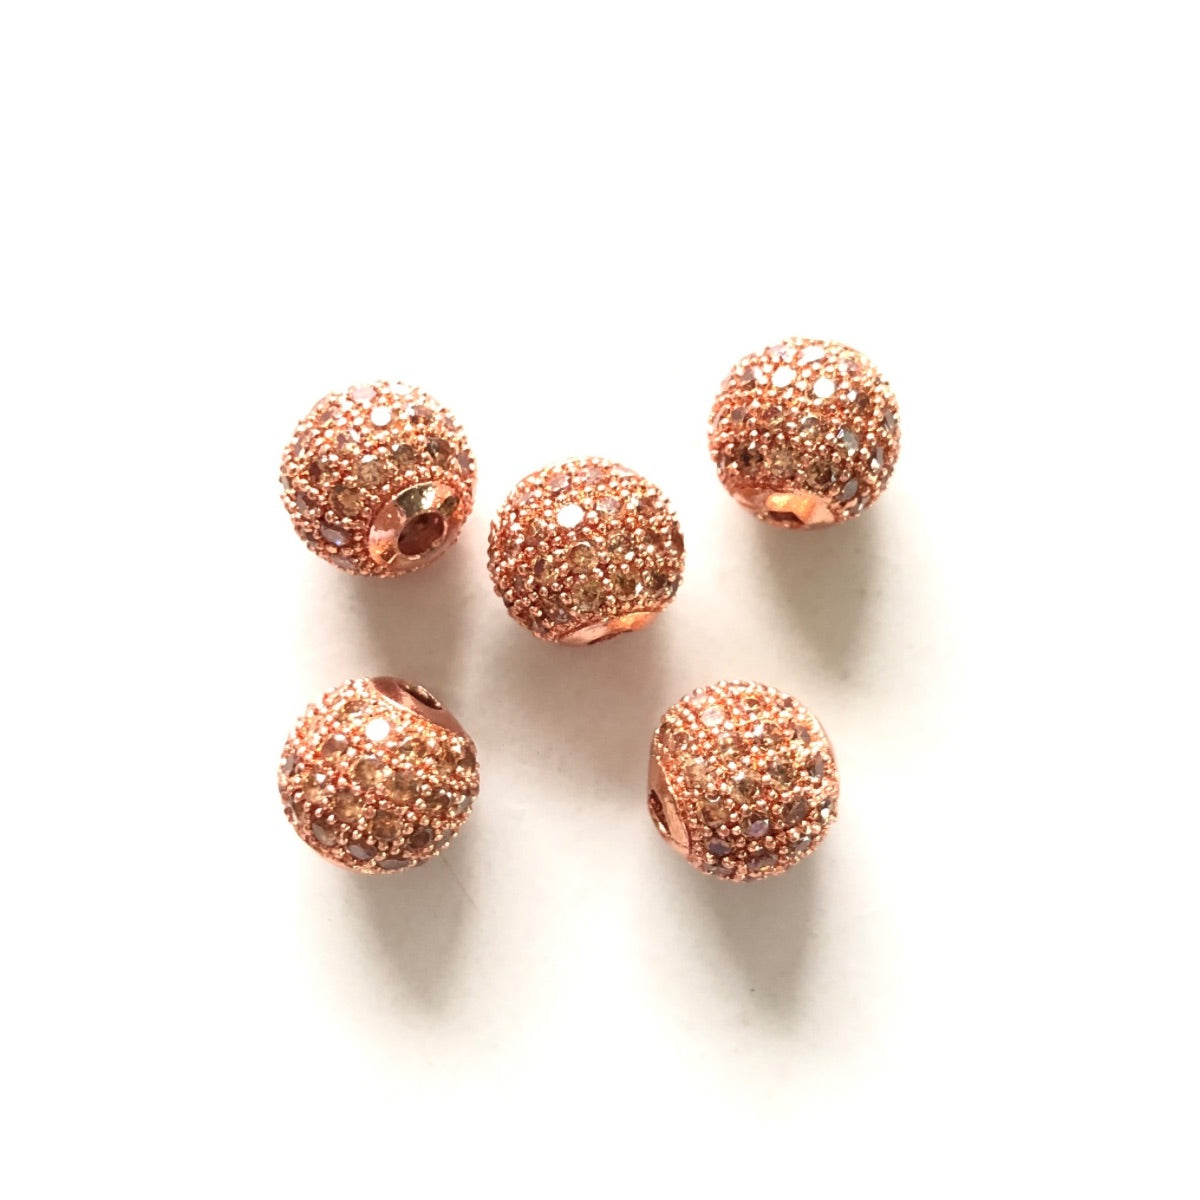 10pcs/lot 6mm, 8mm Colorful CZ Paved Ball Spacers Rose Gold Champange CZ Paved Spacers 6mm Beads 8mm Beads Ball Beads Colorful Zirconia New Spacers Arrivals Charms Beads Beyond